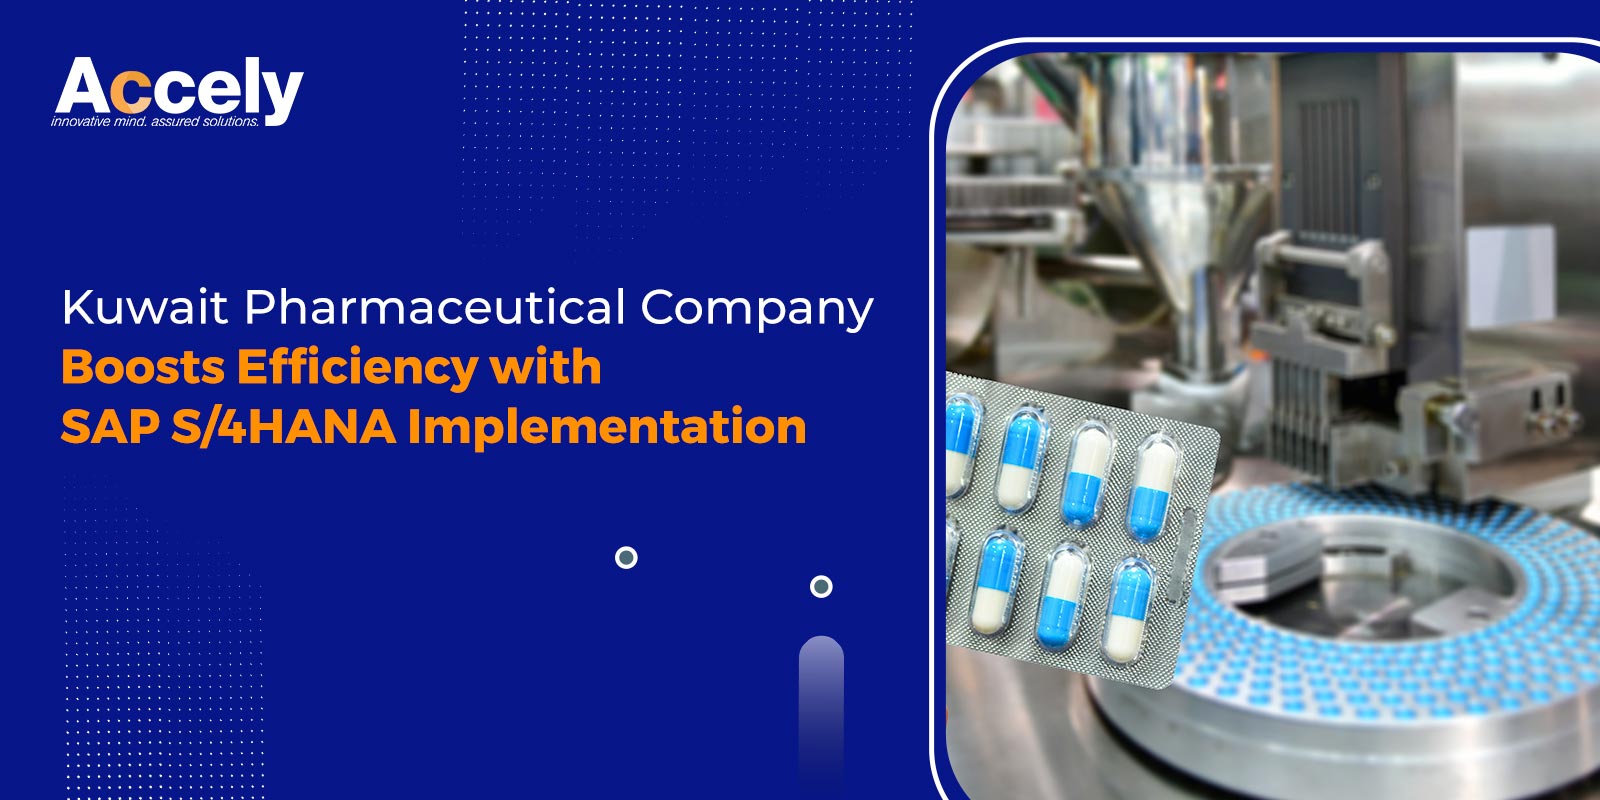 Kuwait Pharmaceutical Company Boosts Efficiency with SAP S/4HANA Implementation